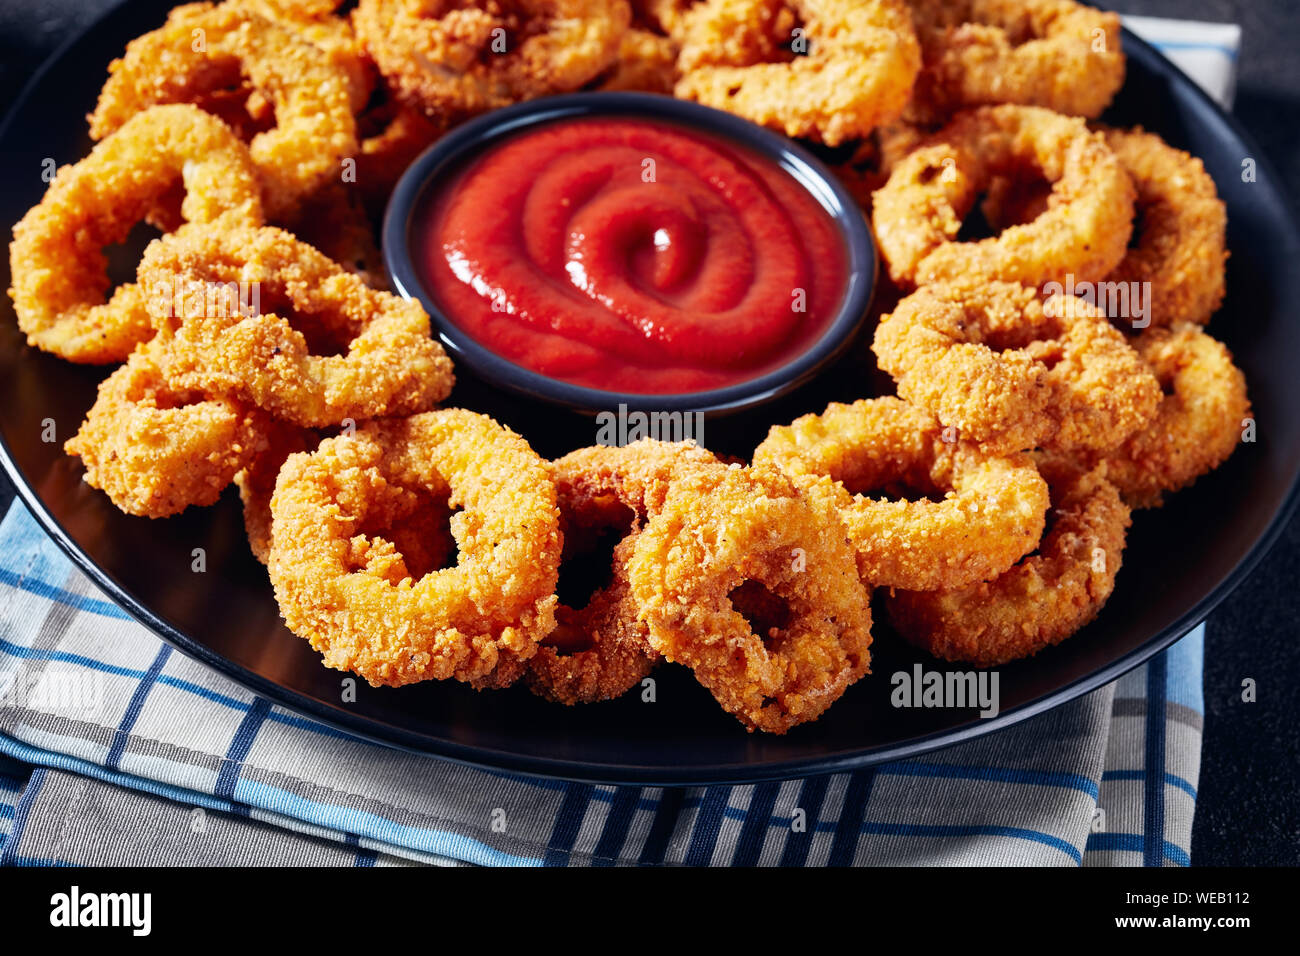 Fried squid rings breaded with lemon Stock Photo by ©koss13 60086227